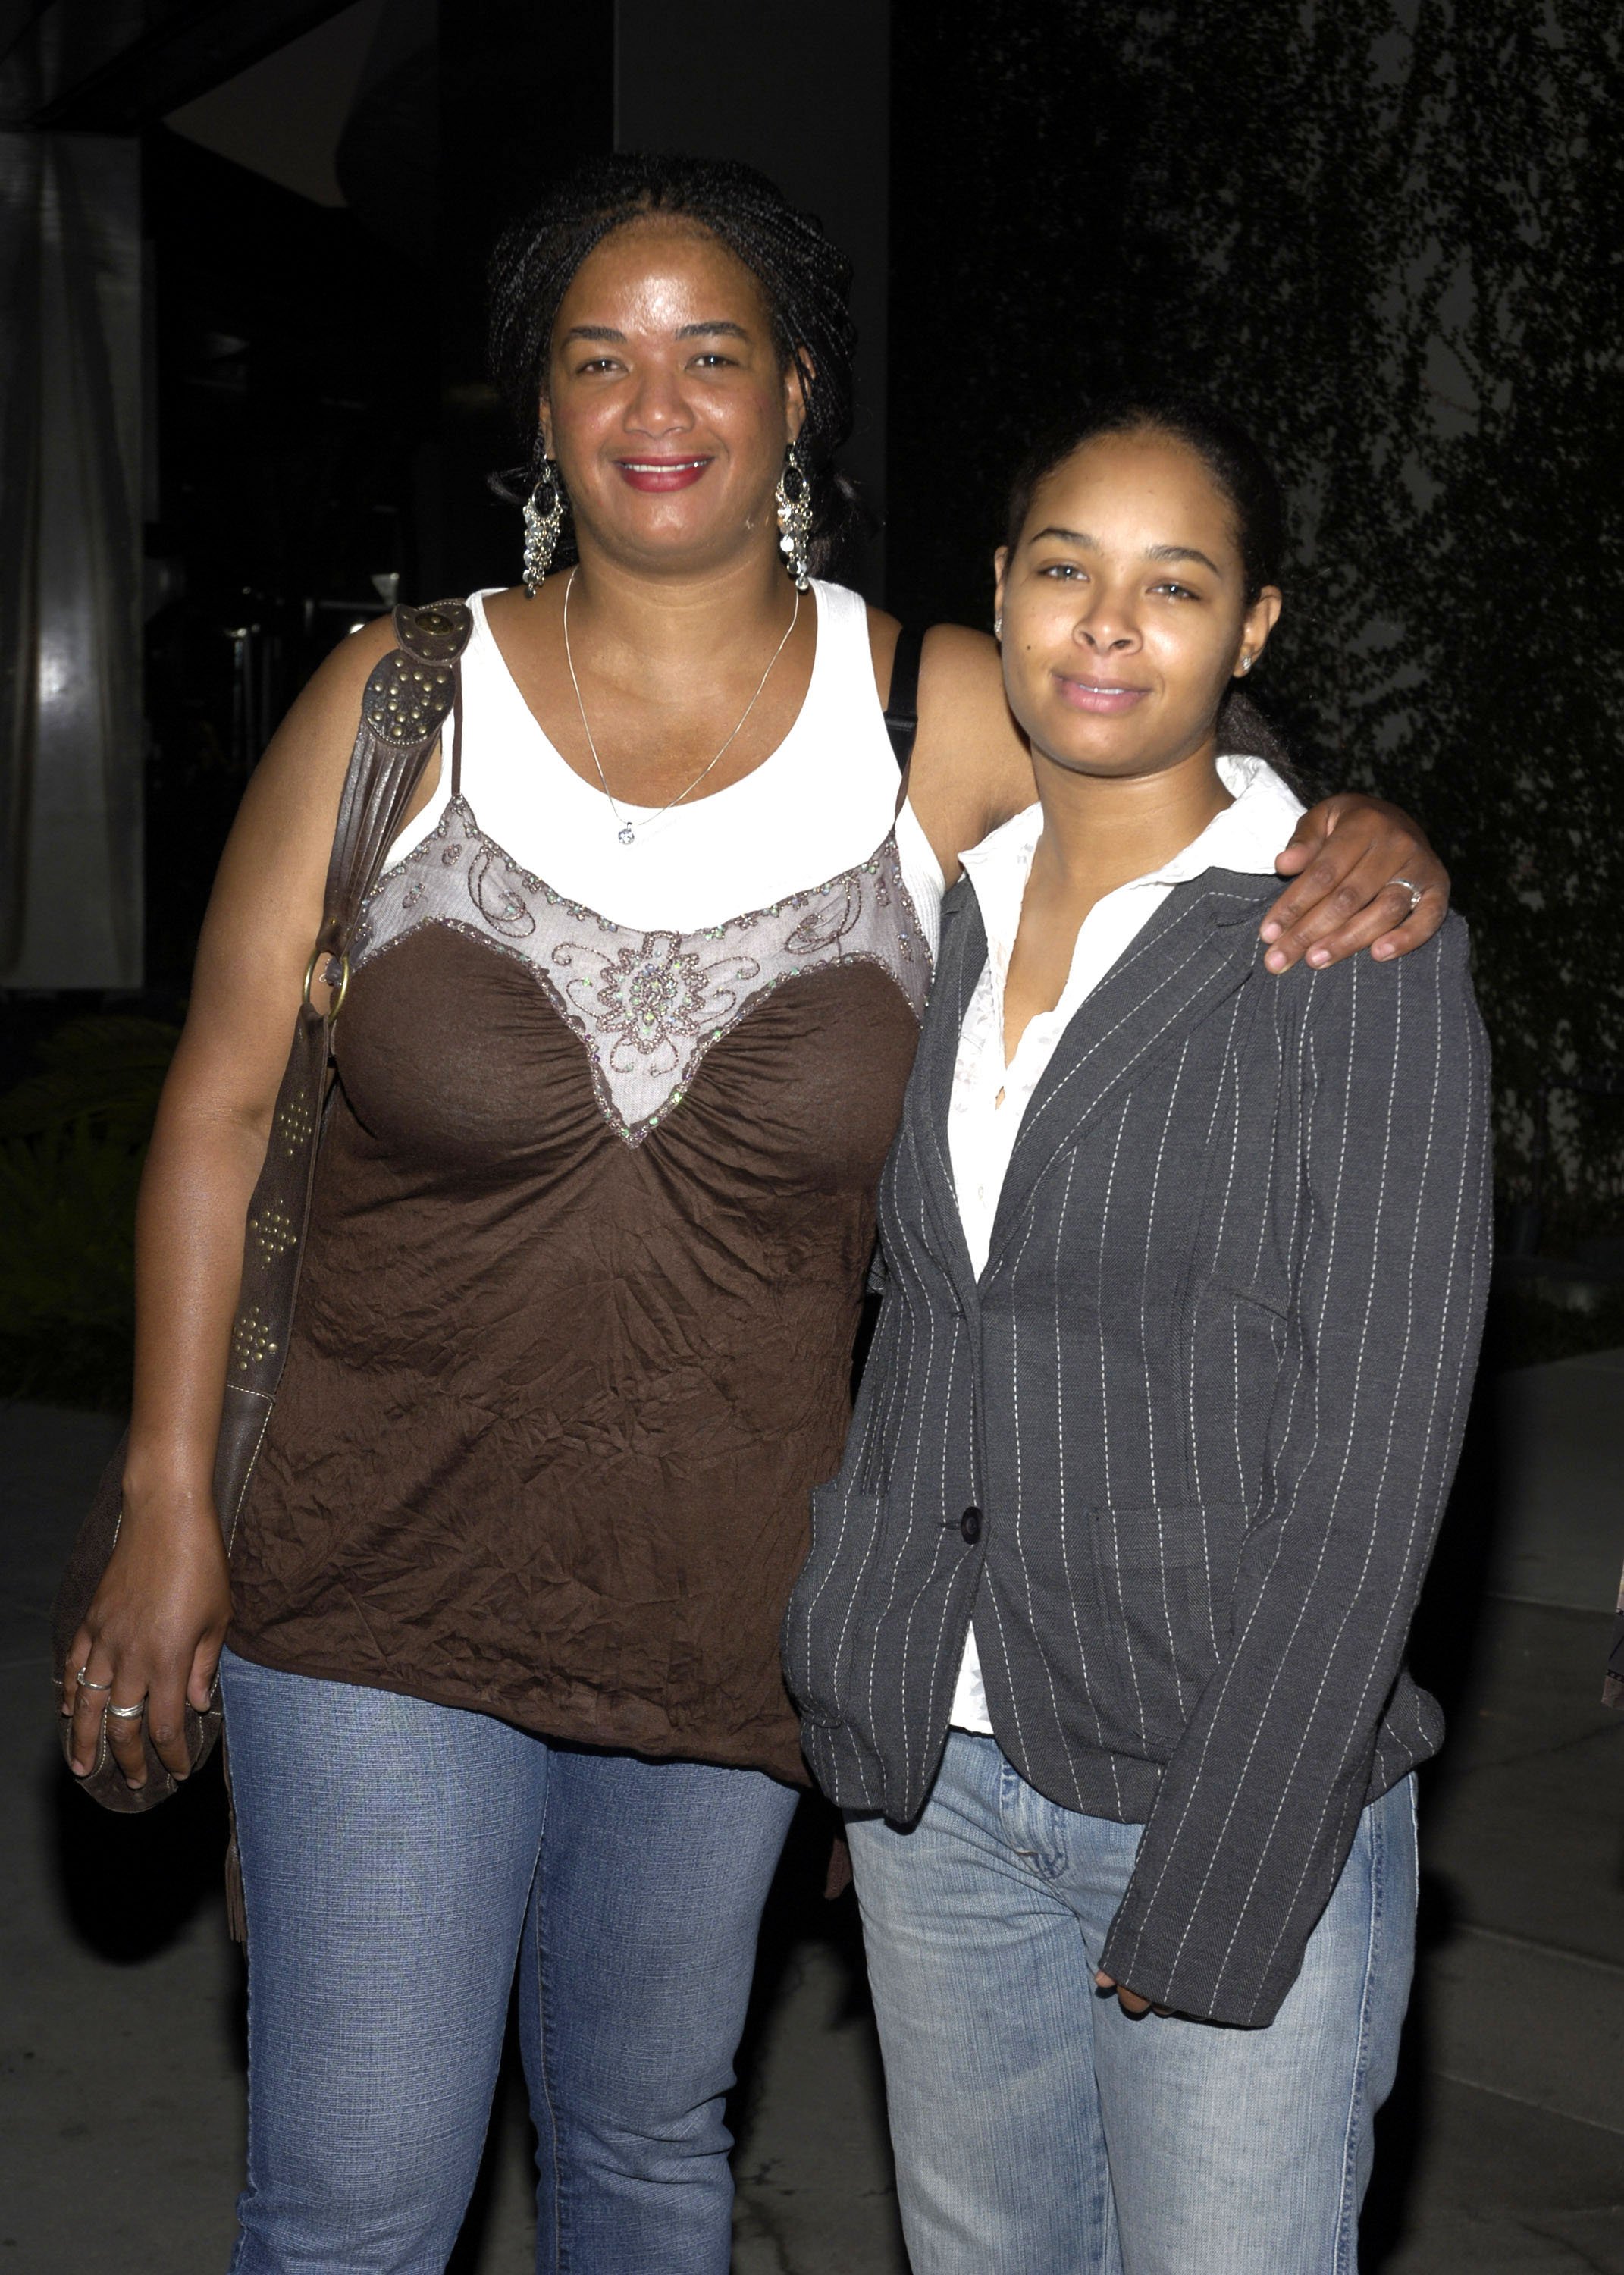 Elvira Wayans and Chaeunte Wayans at "The Last Meal" premiere on September 07, 2005, in California. | Source: Getty Images